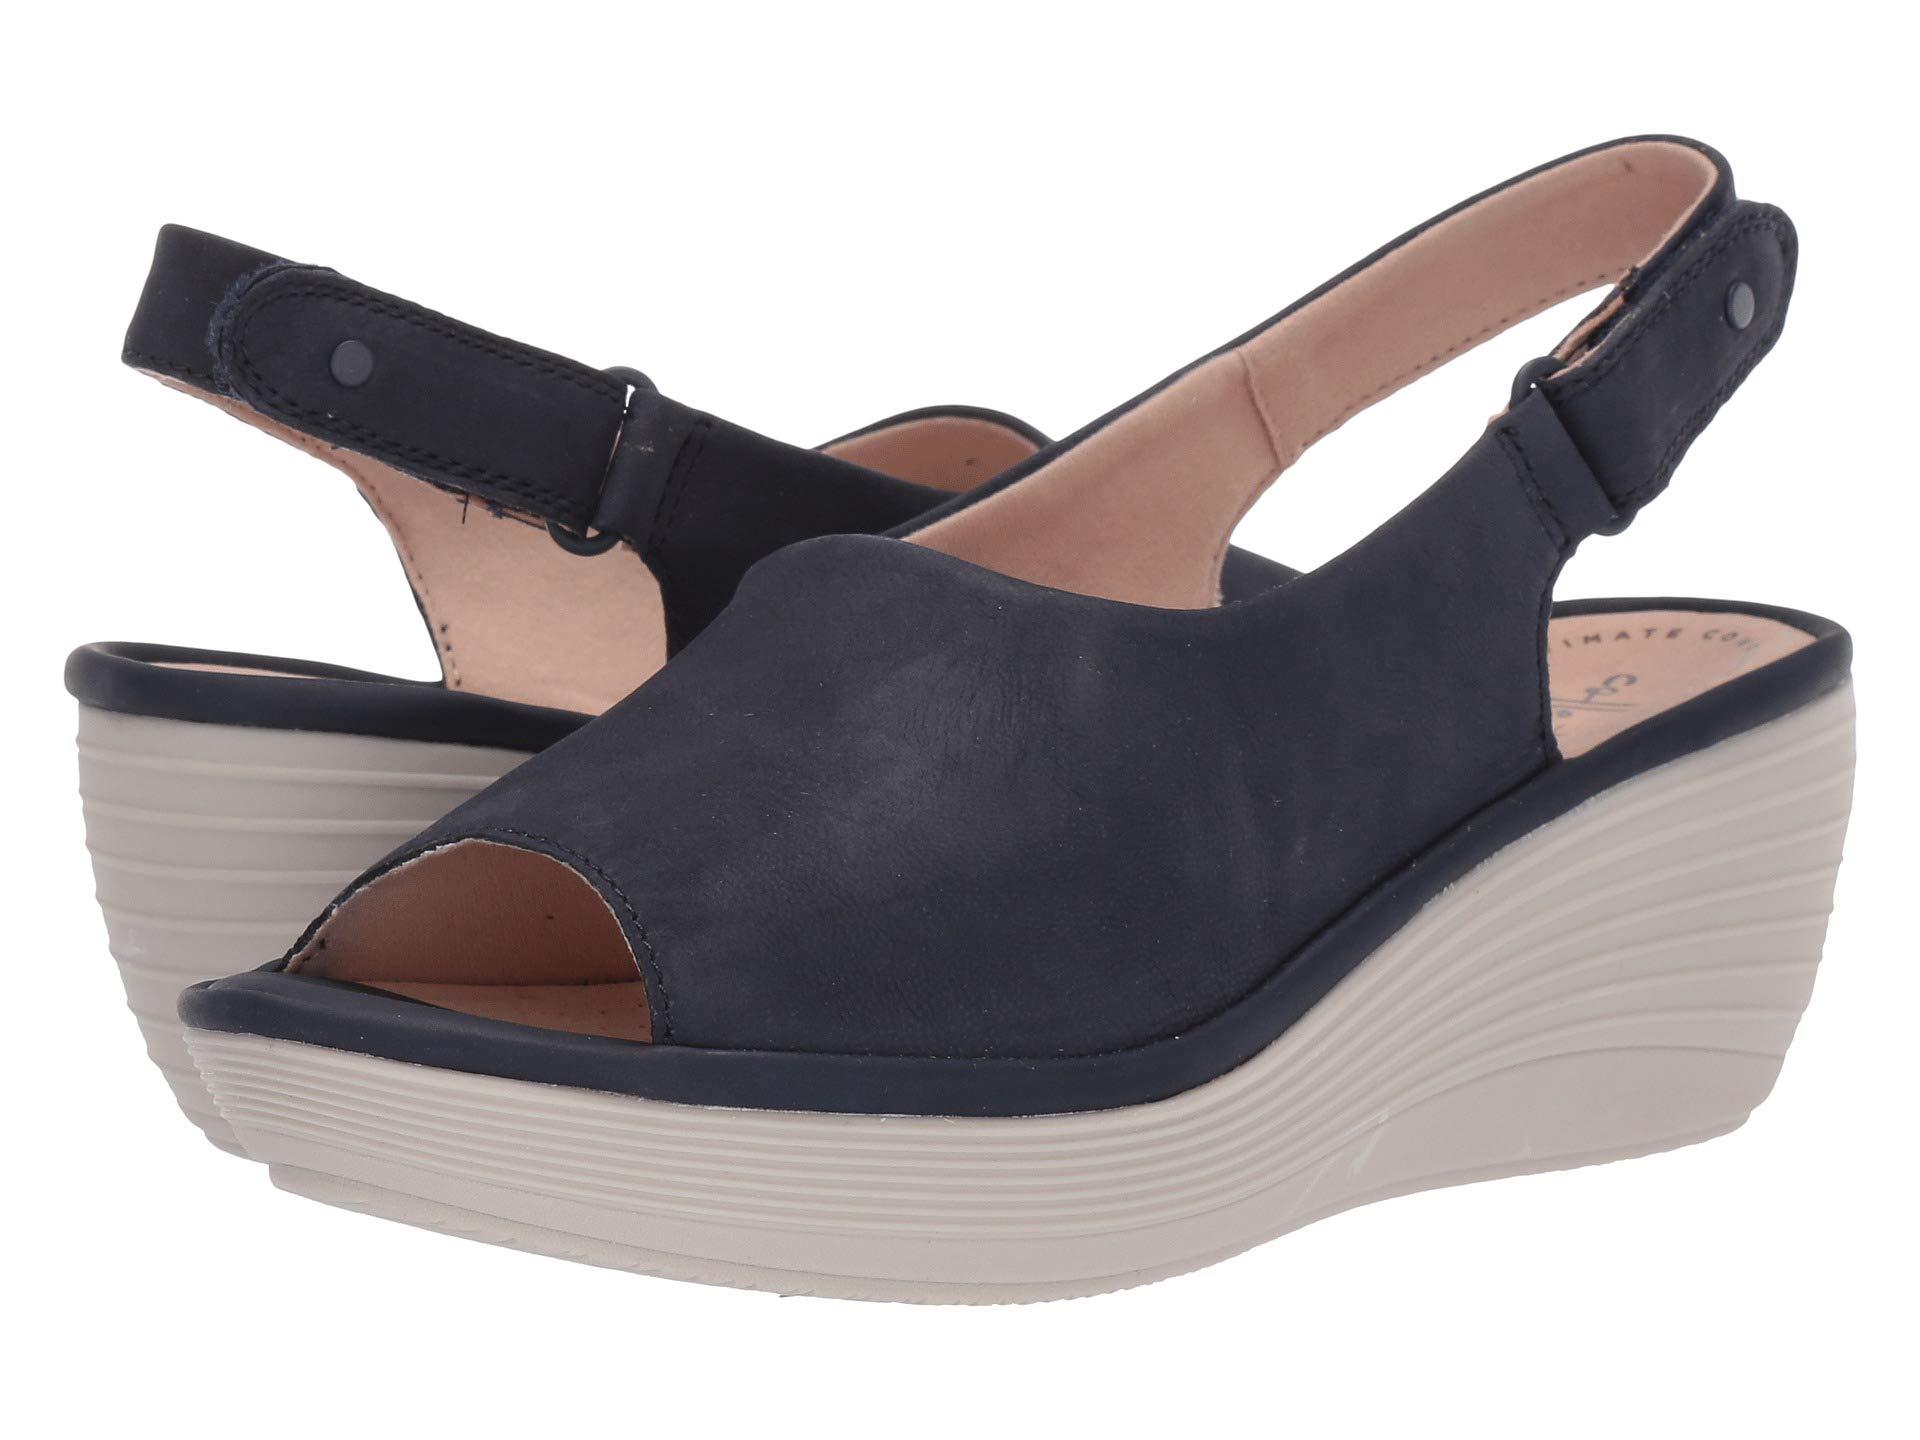 Reedly Shaina Wedge Sandal in Navy 